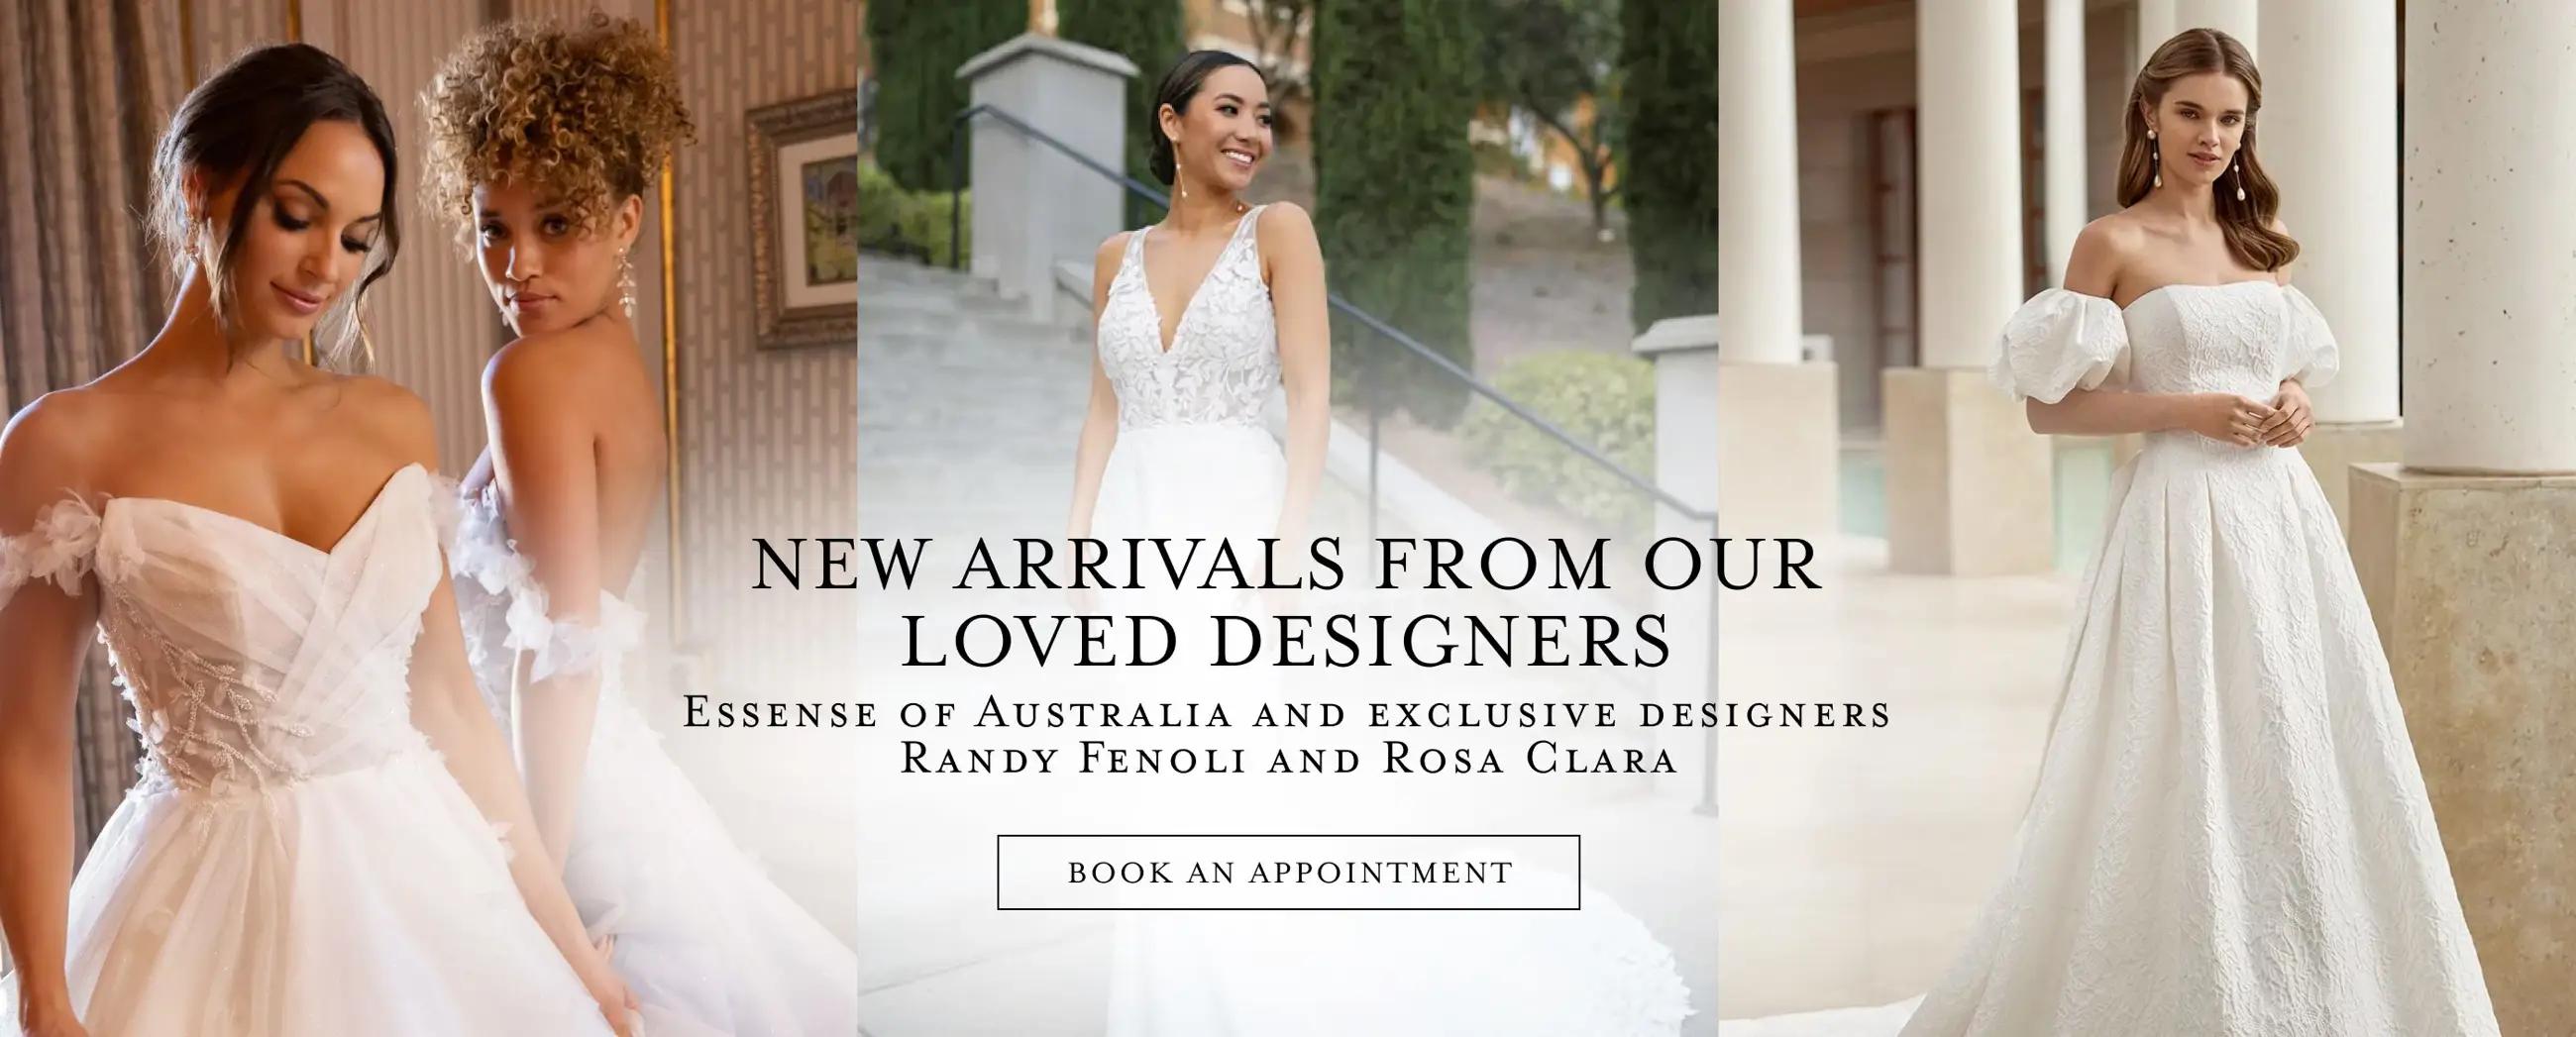 Stunning wedding dresses from Essense of Australia and exclusive designers Randy Fenoli and Rosa Clara at Bella Bridal Gallery. Models wearing wedding gowns.